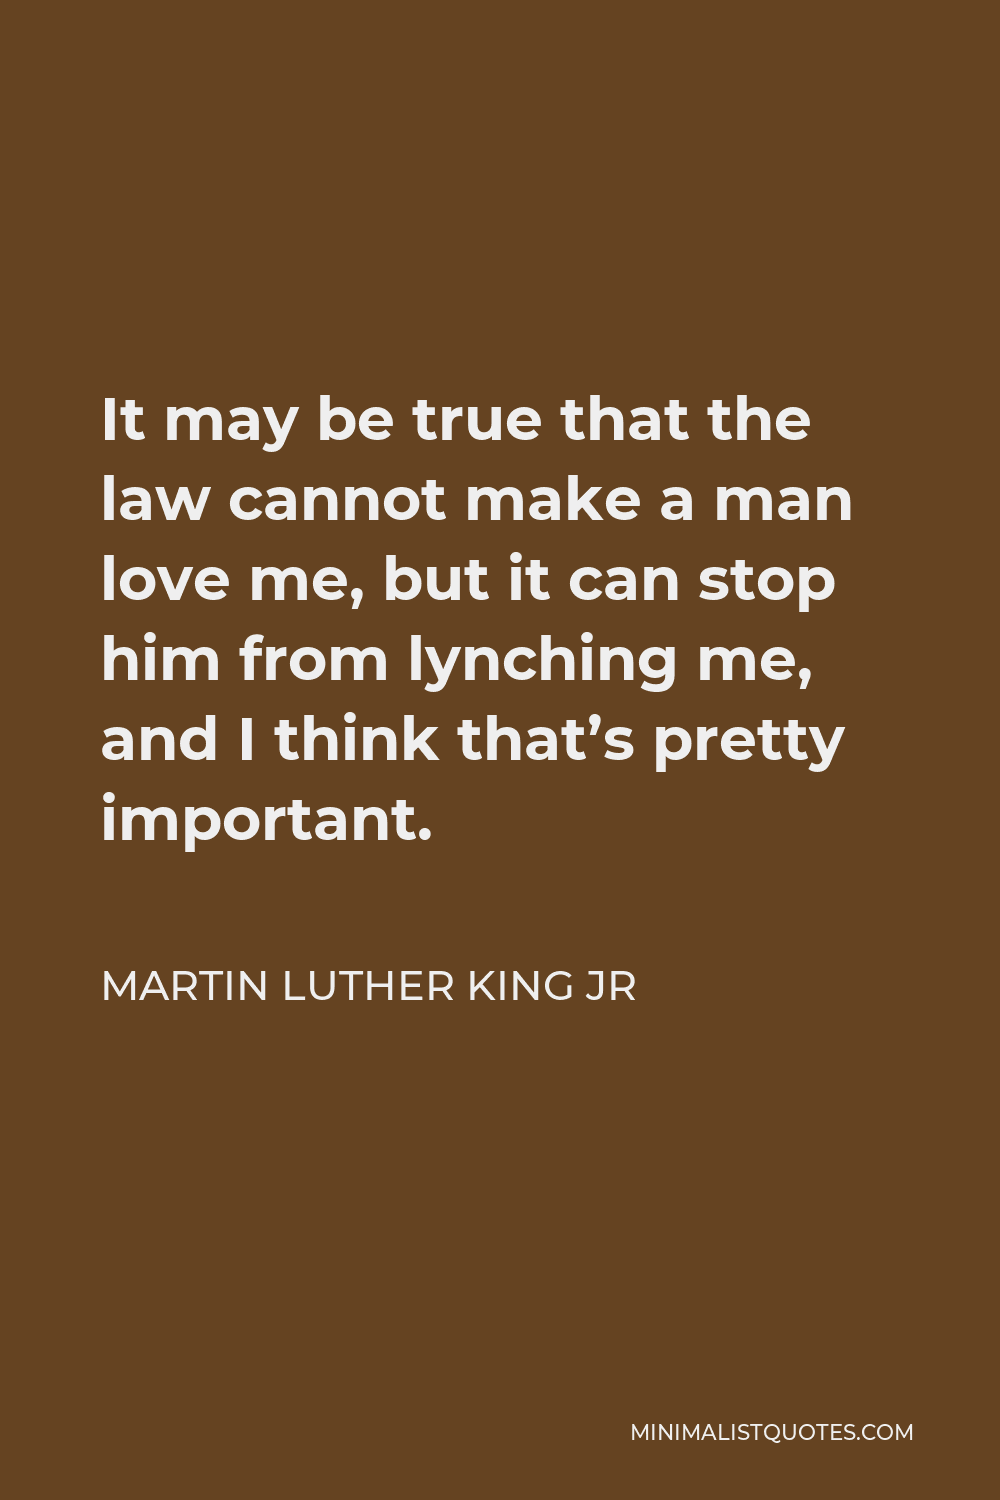 Martin Luther King Jr Quote - It may be true that the law cannot make a man love me, but it can stop him from lynching me, and I think that’s pretty important.